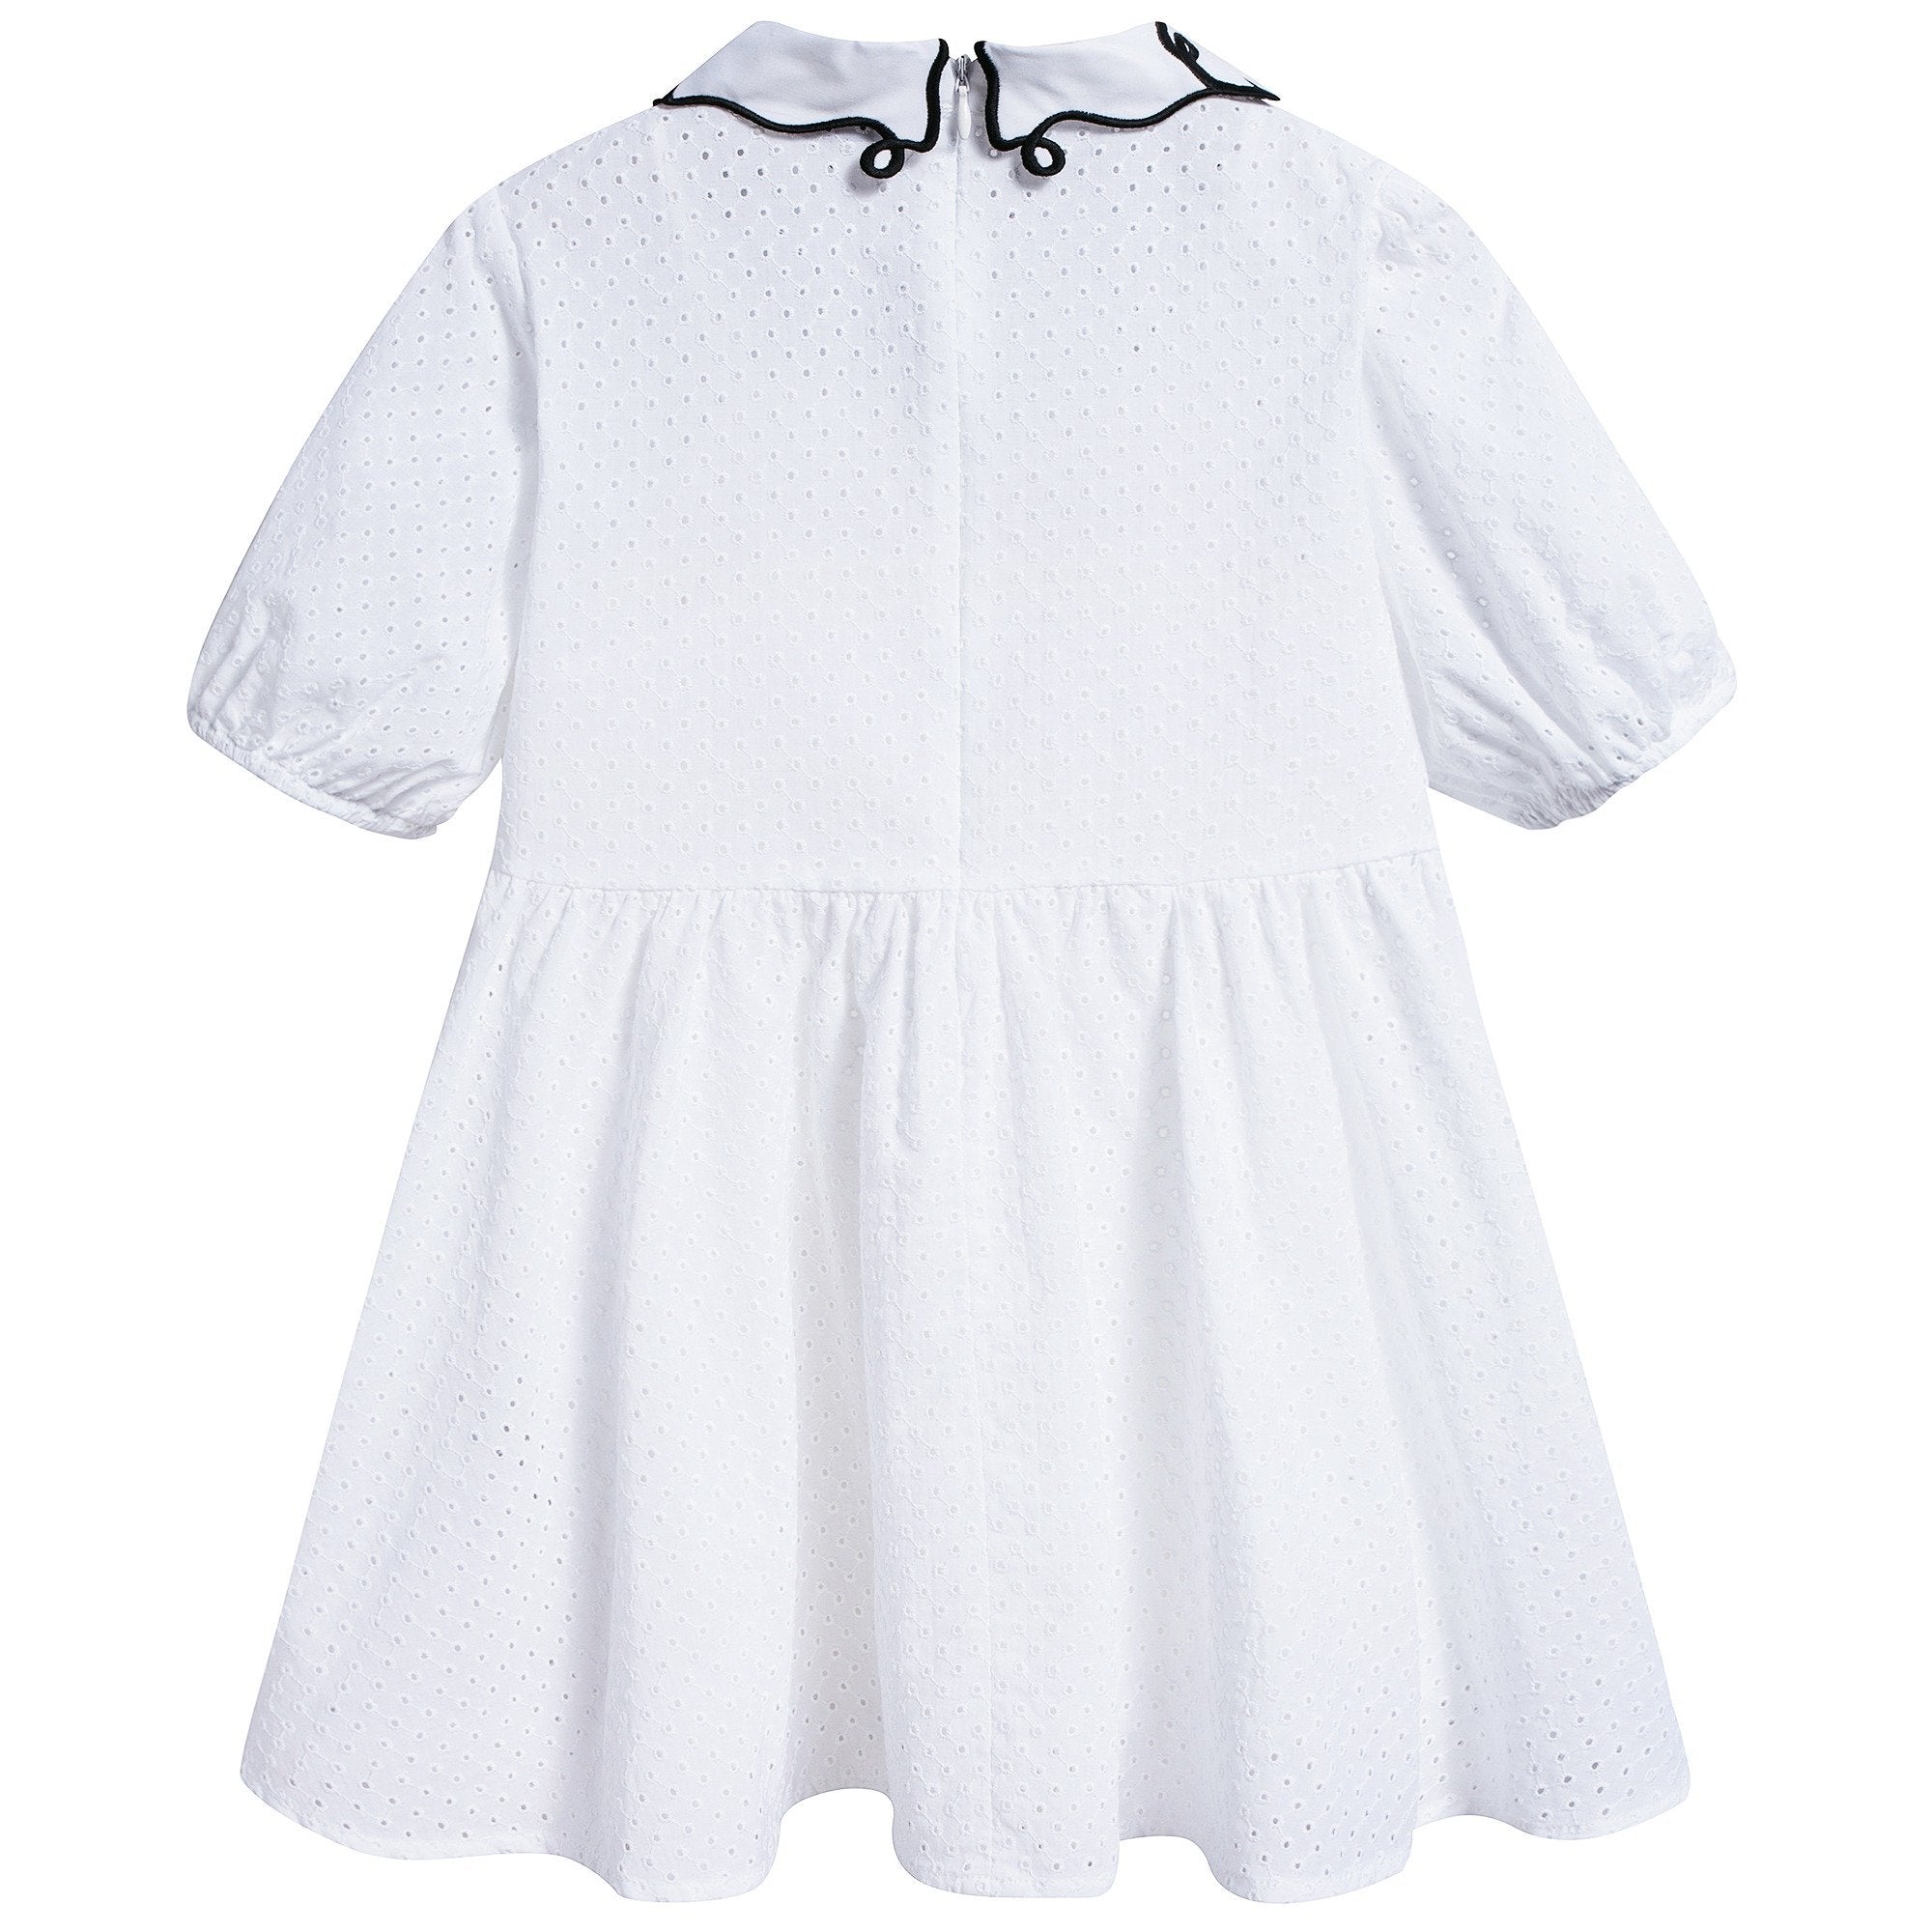 Girls White Collar And Embroidery Cotton Woven Dress